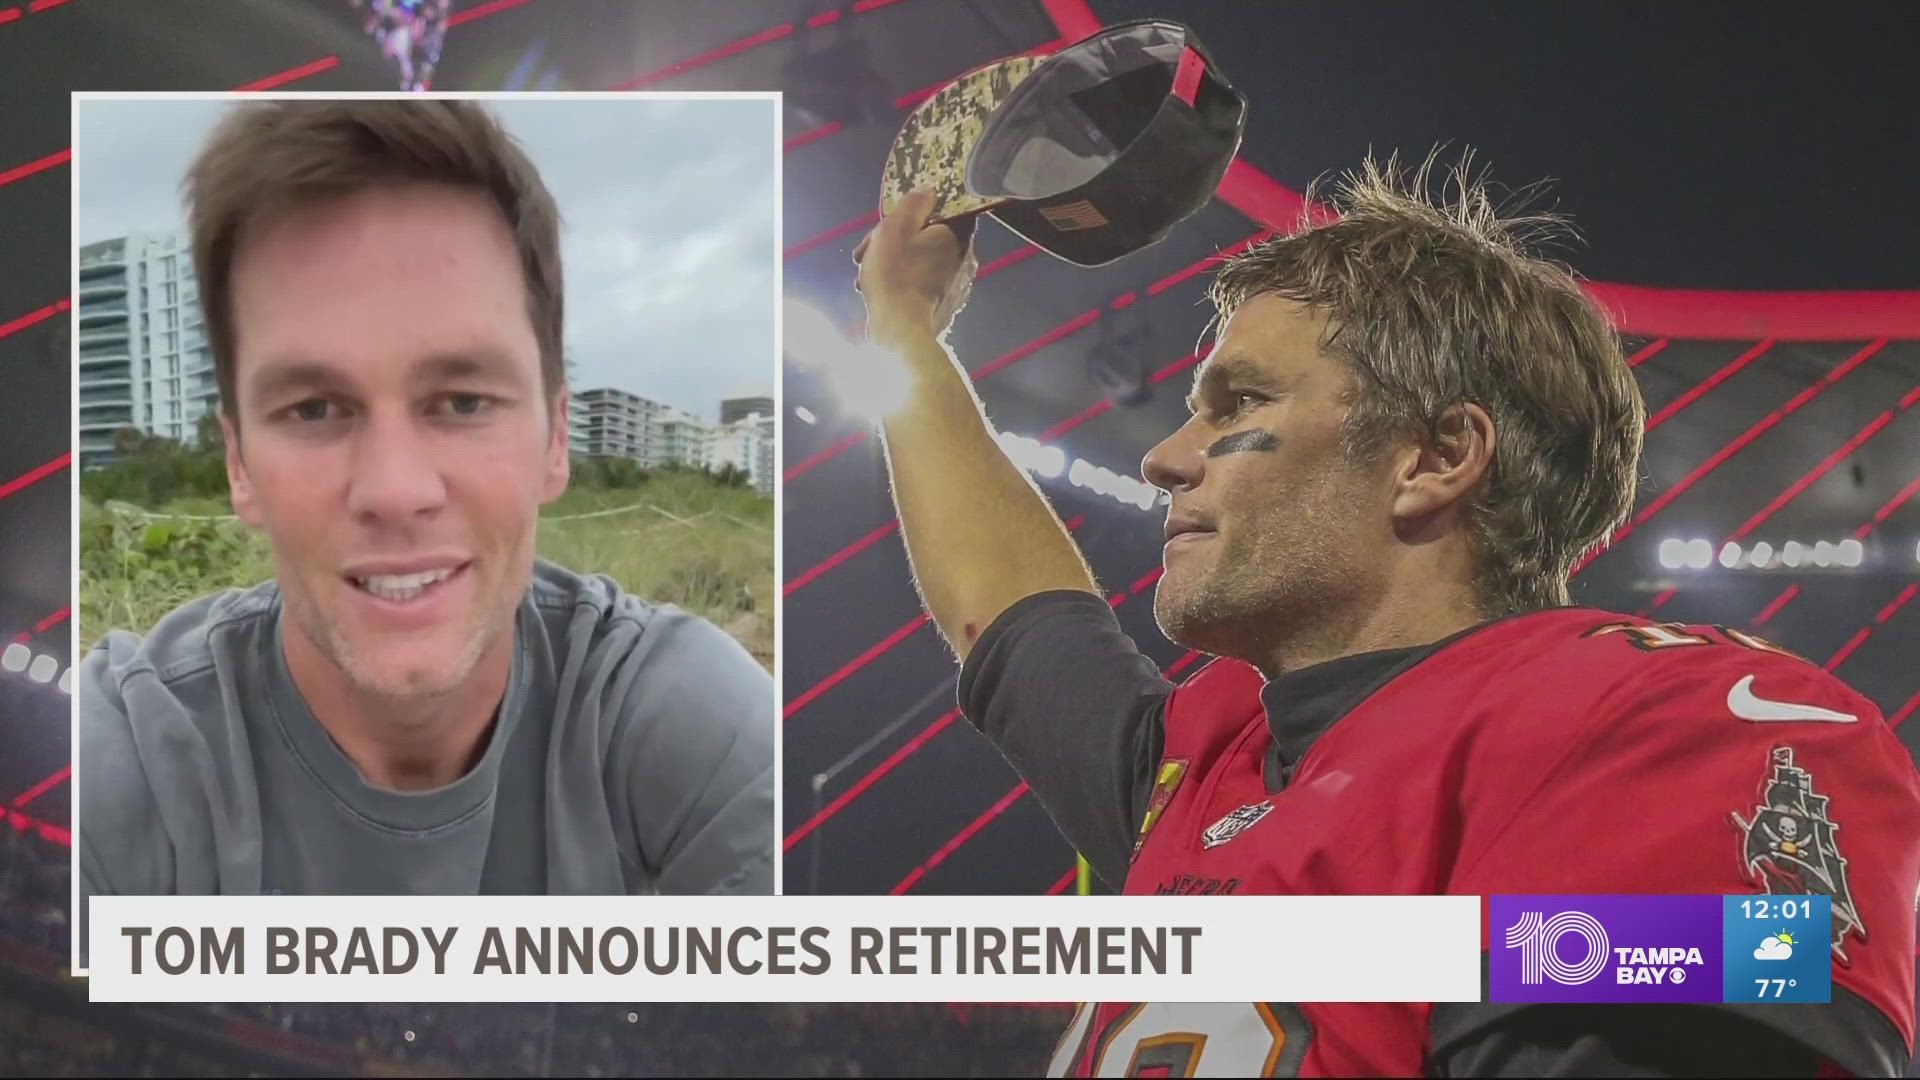 Exactly one year after he first announced his retirement, Brady made a video saying he's hanging up his helmet for good.